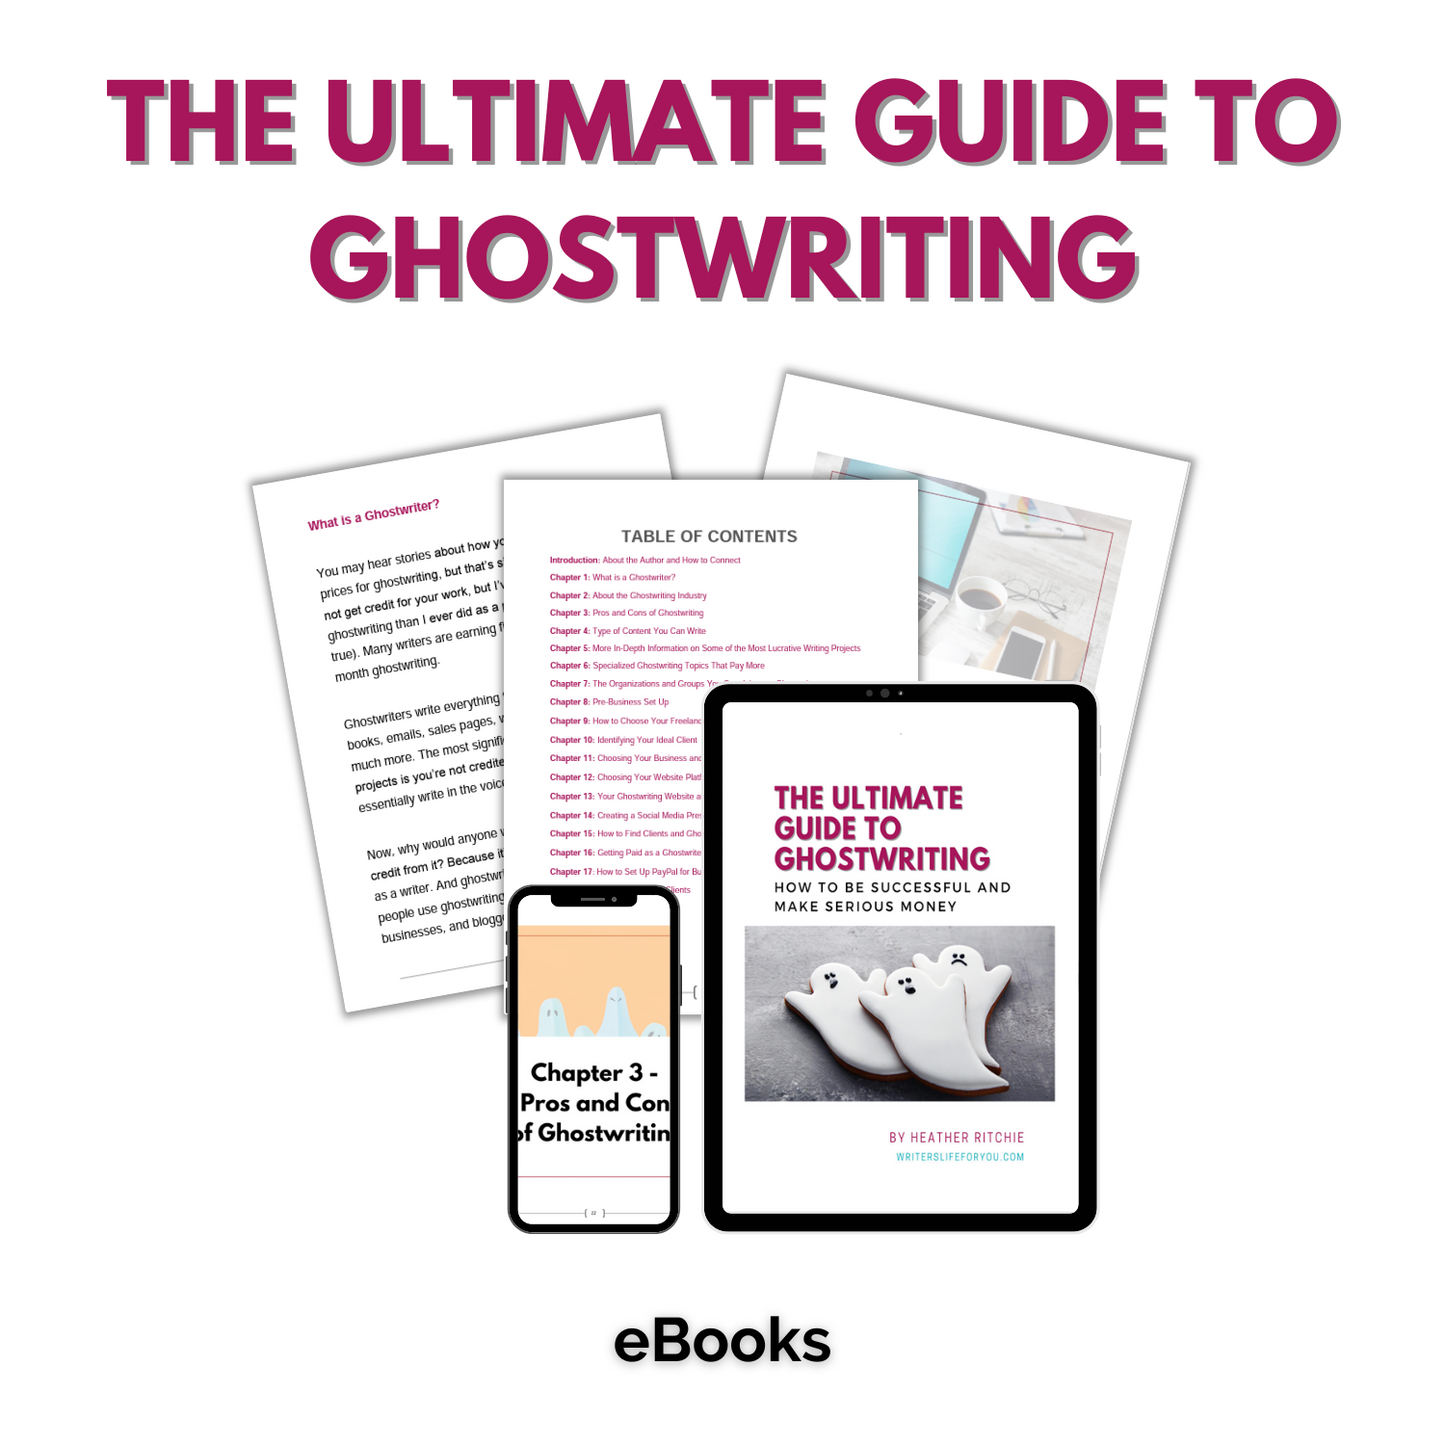 The Ultimate Guide to Ghostwriting